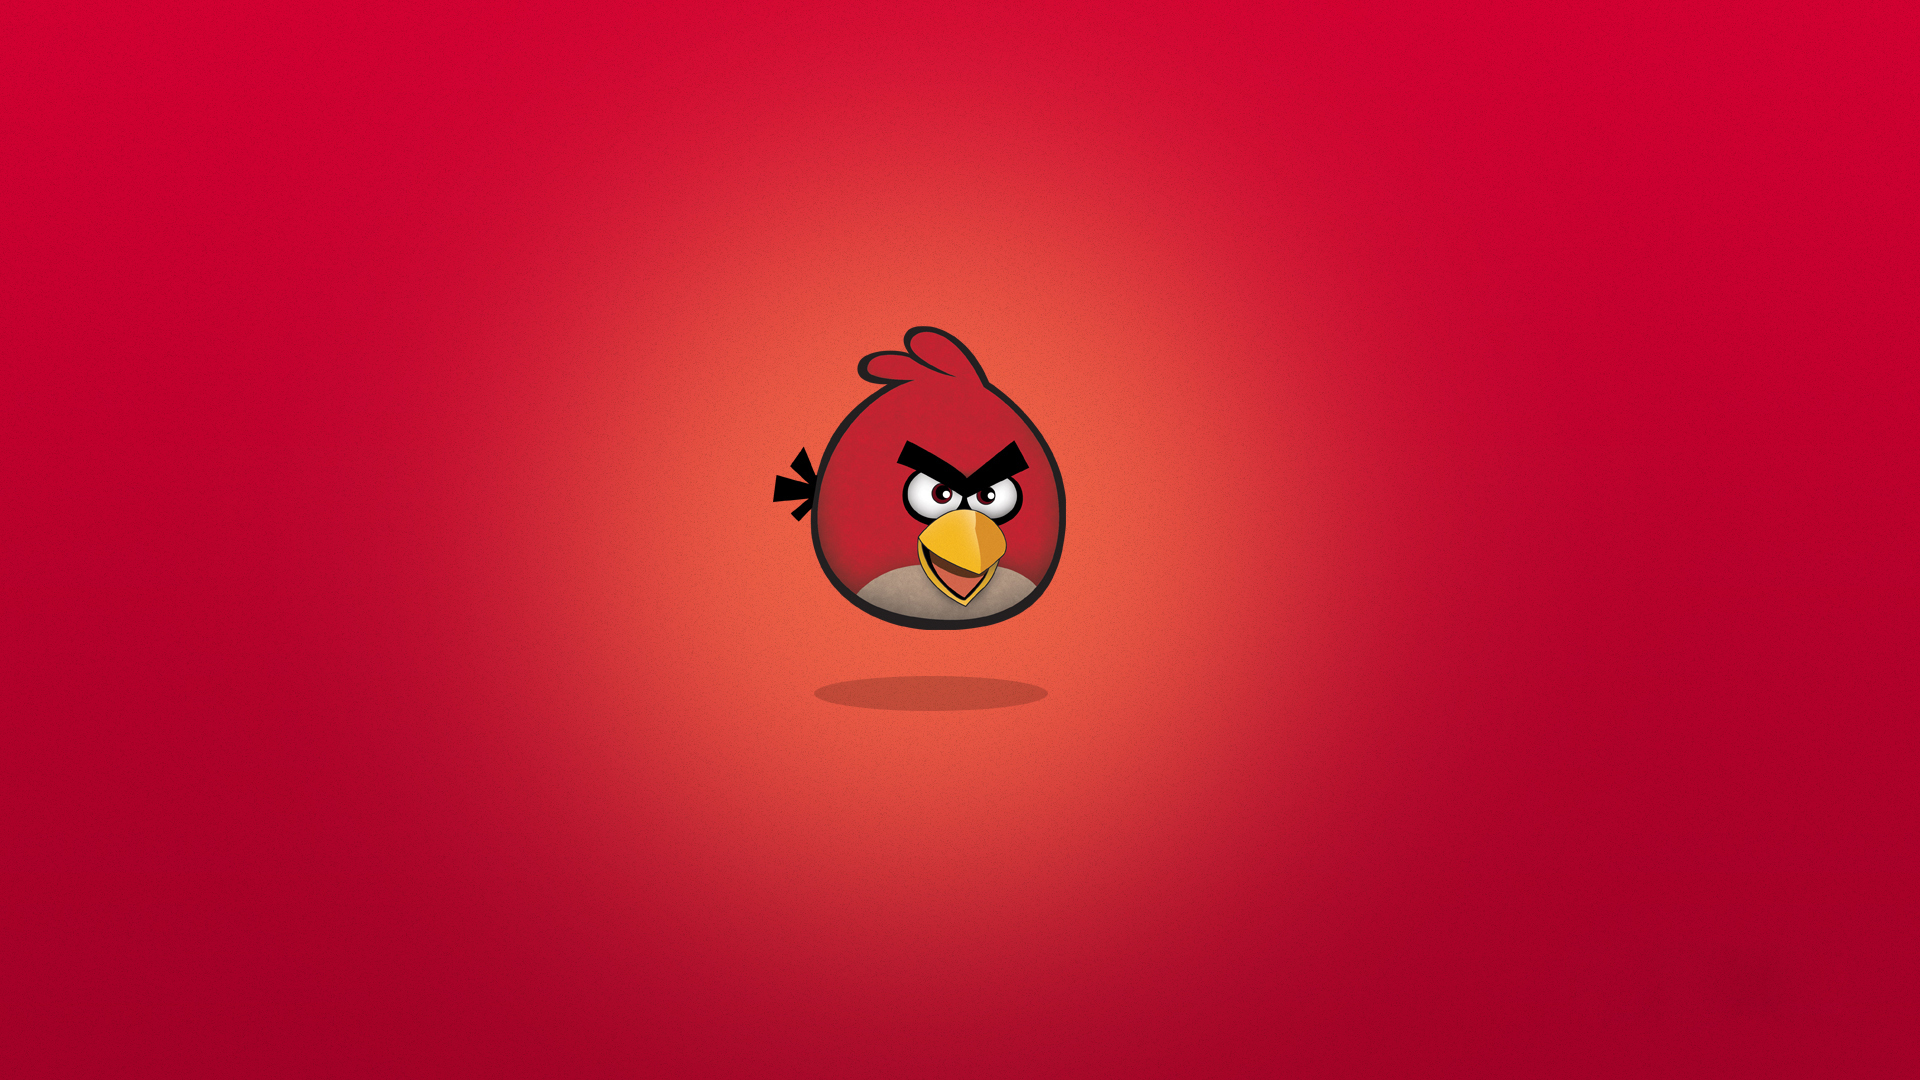 Angry Birds Wallpaper Hd For Pc